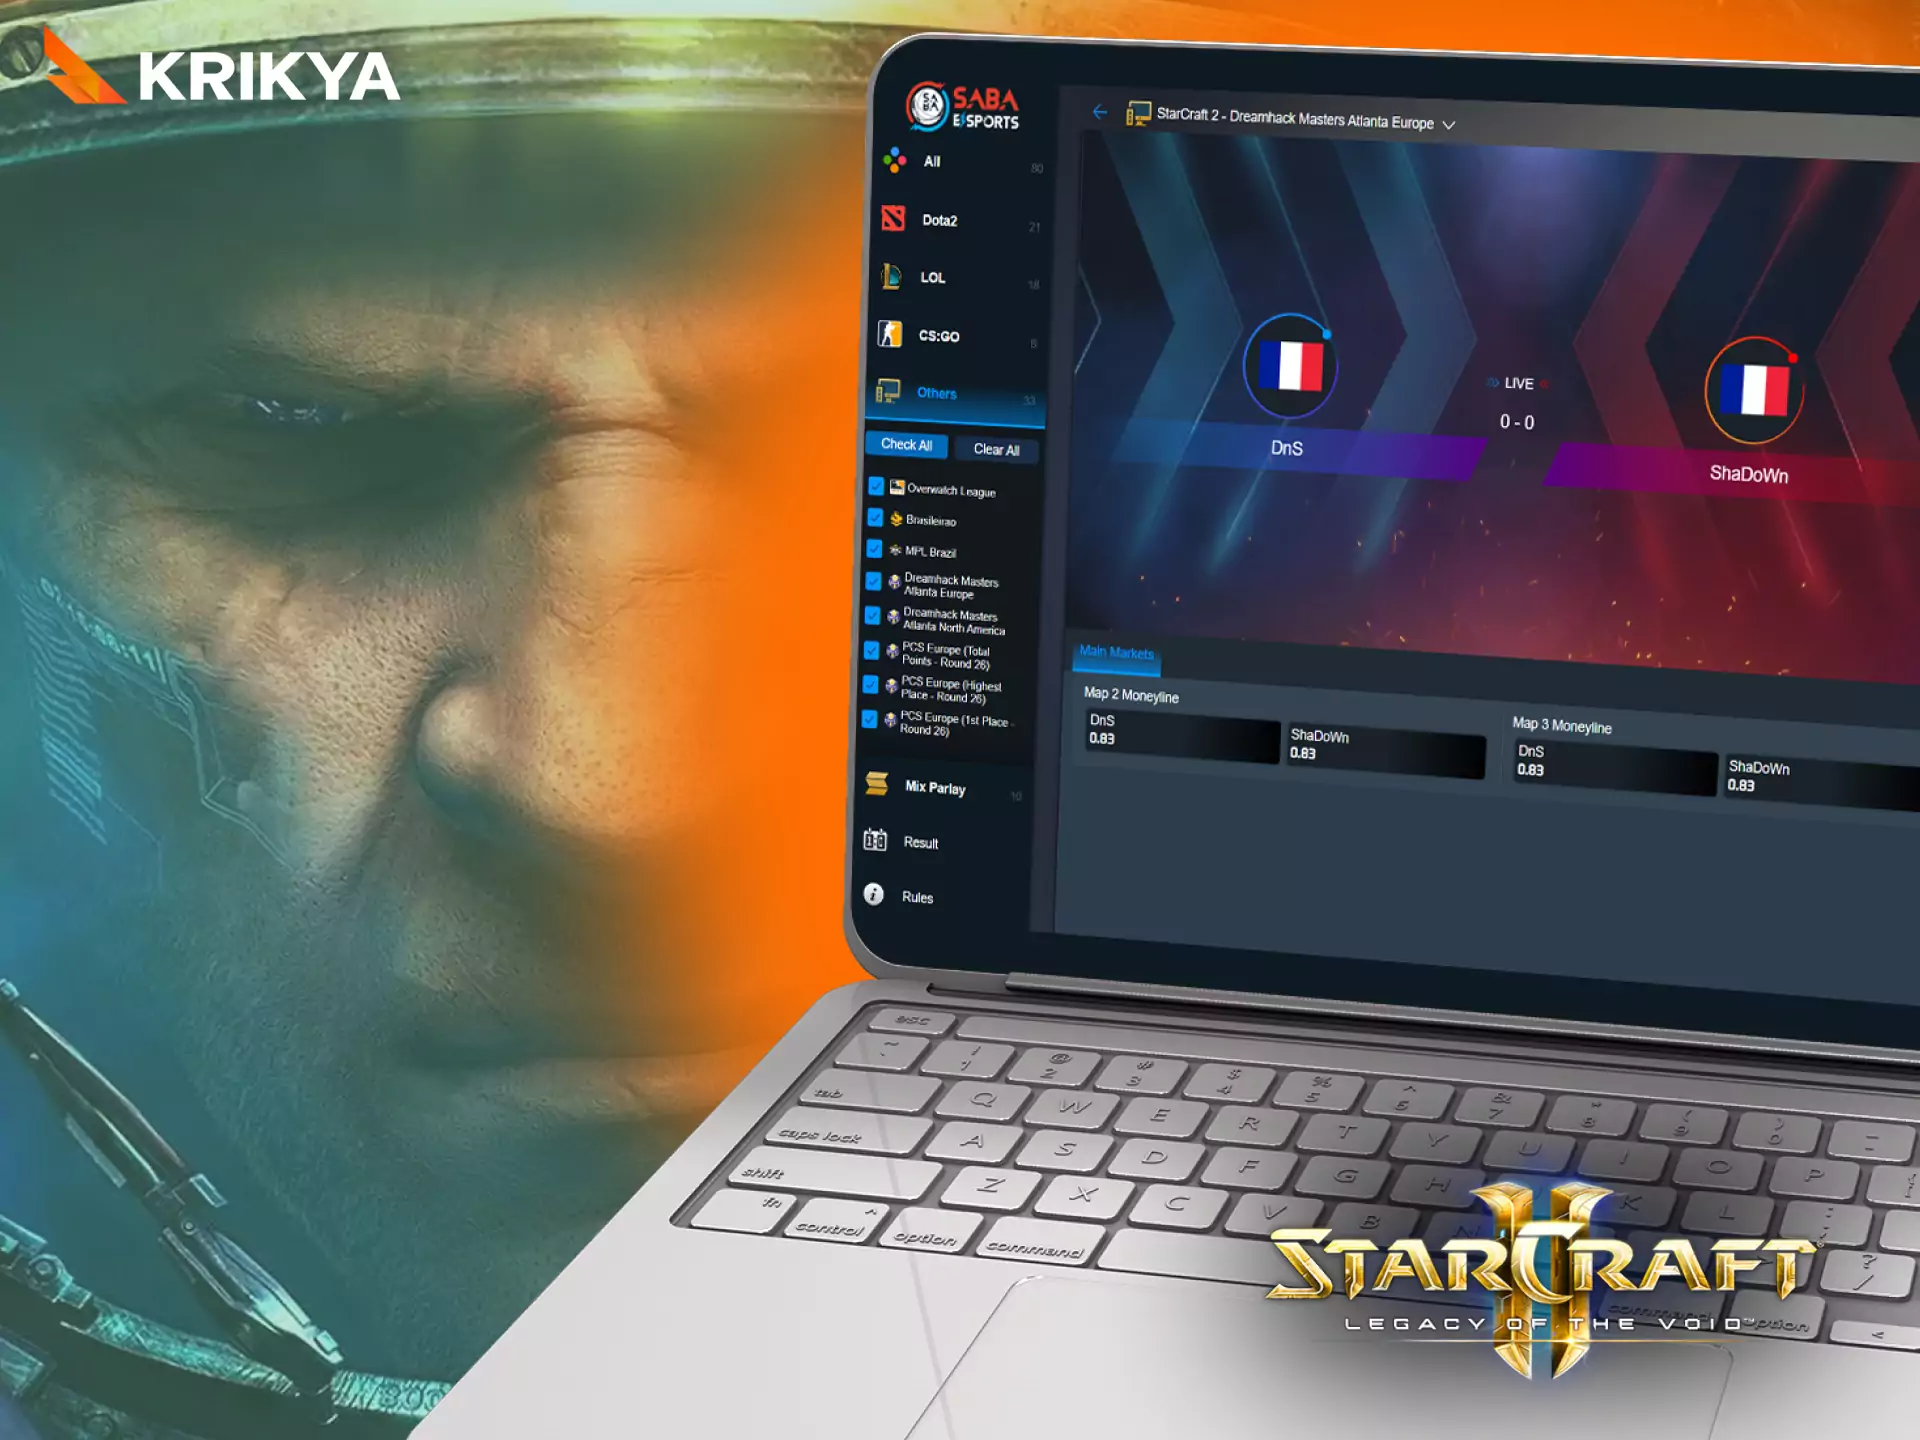 On Krikya, place bets on various Starcraft competitions.